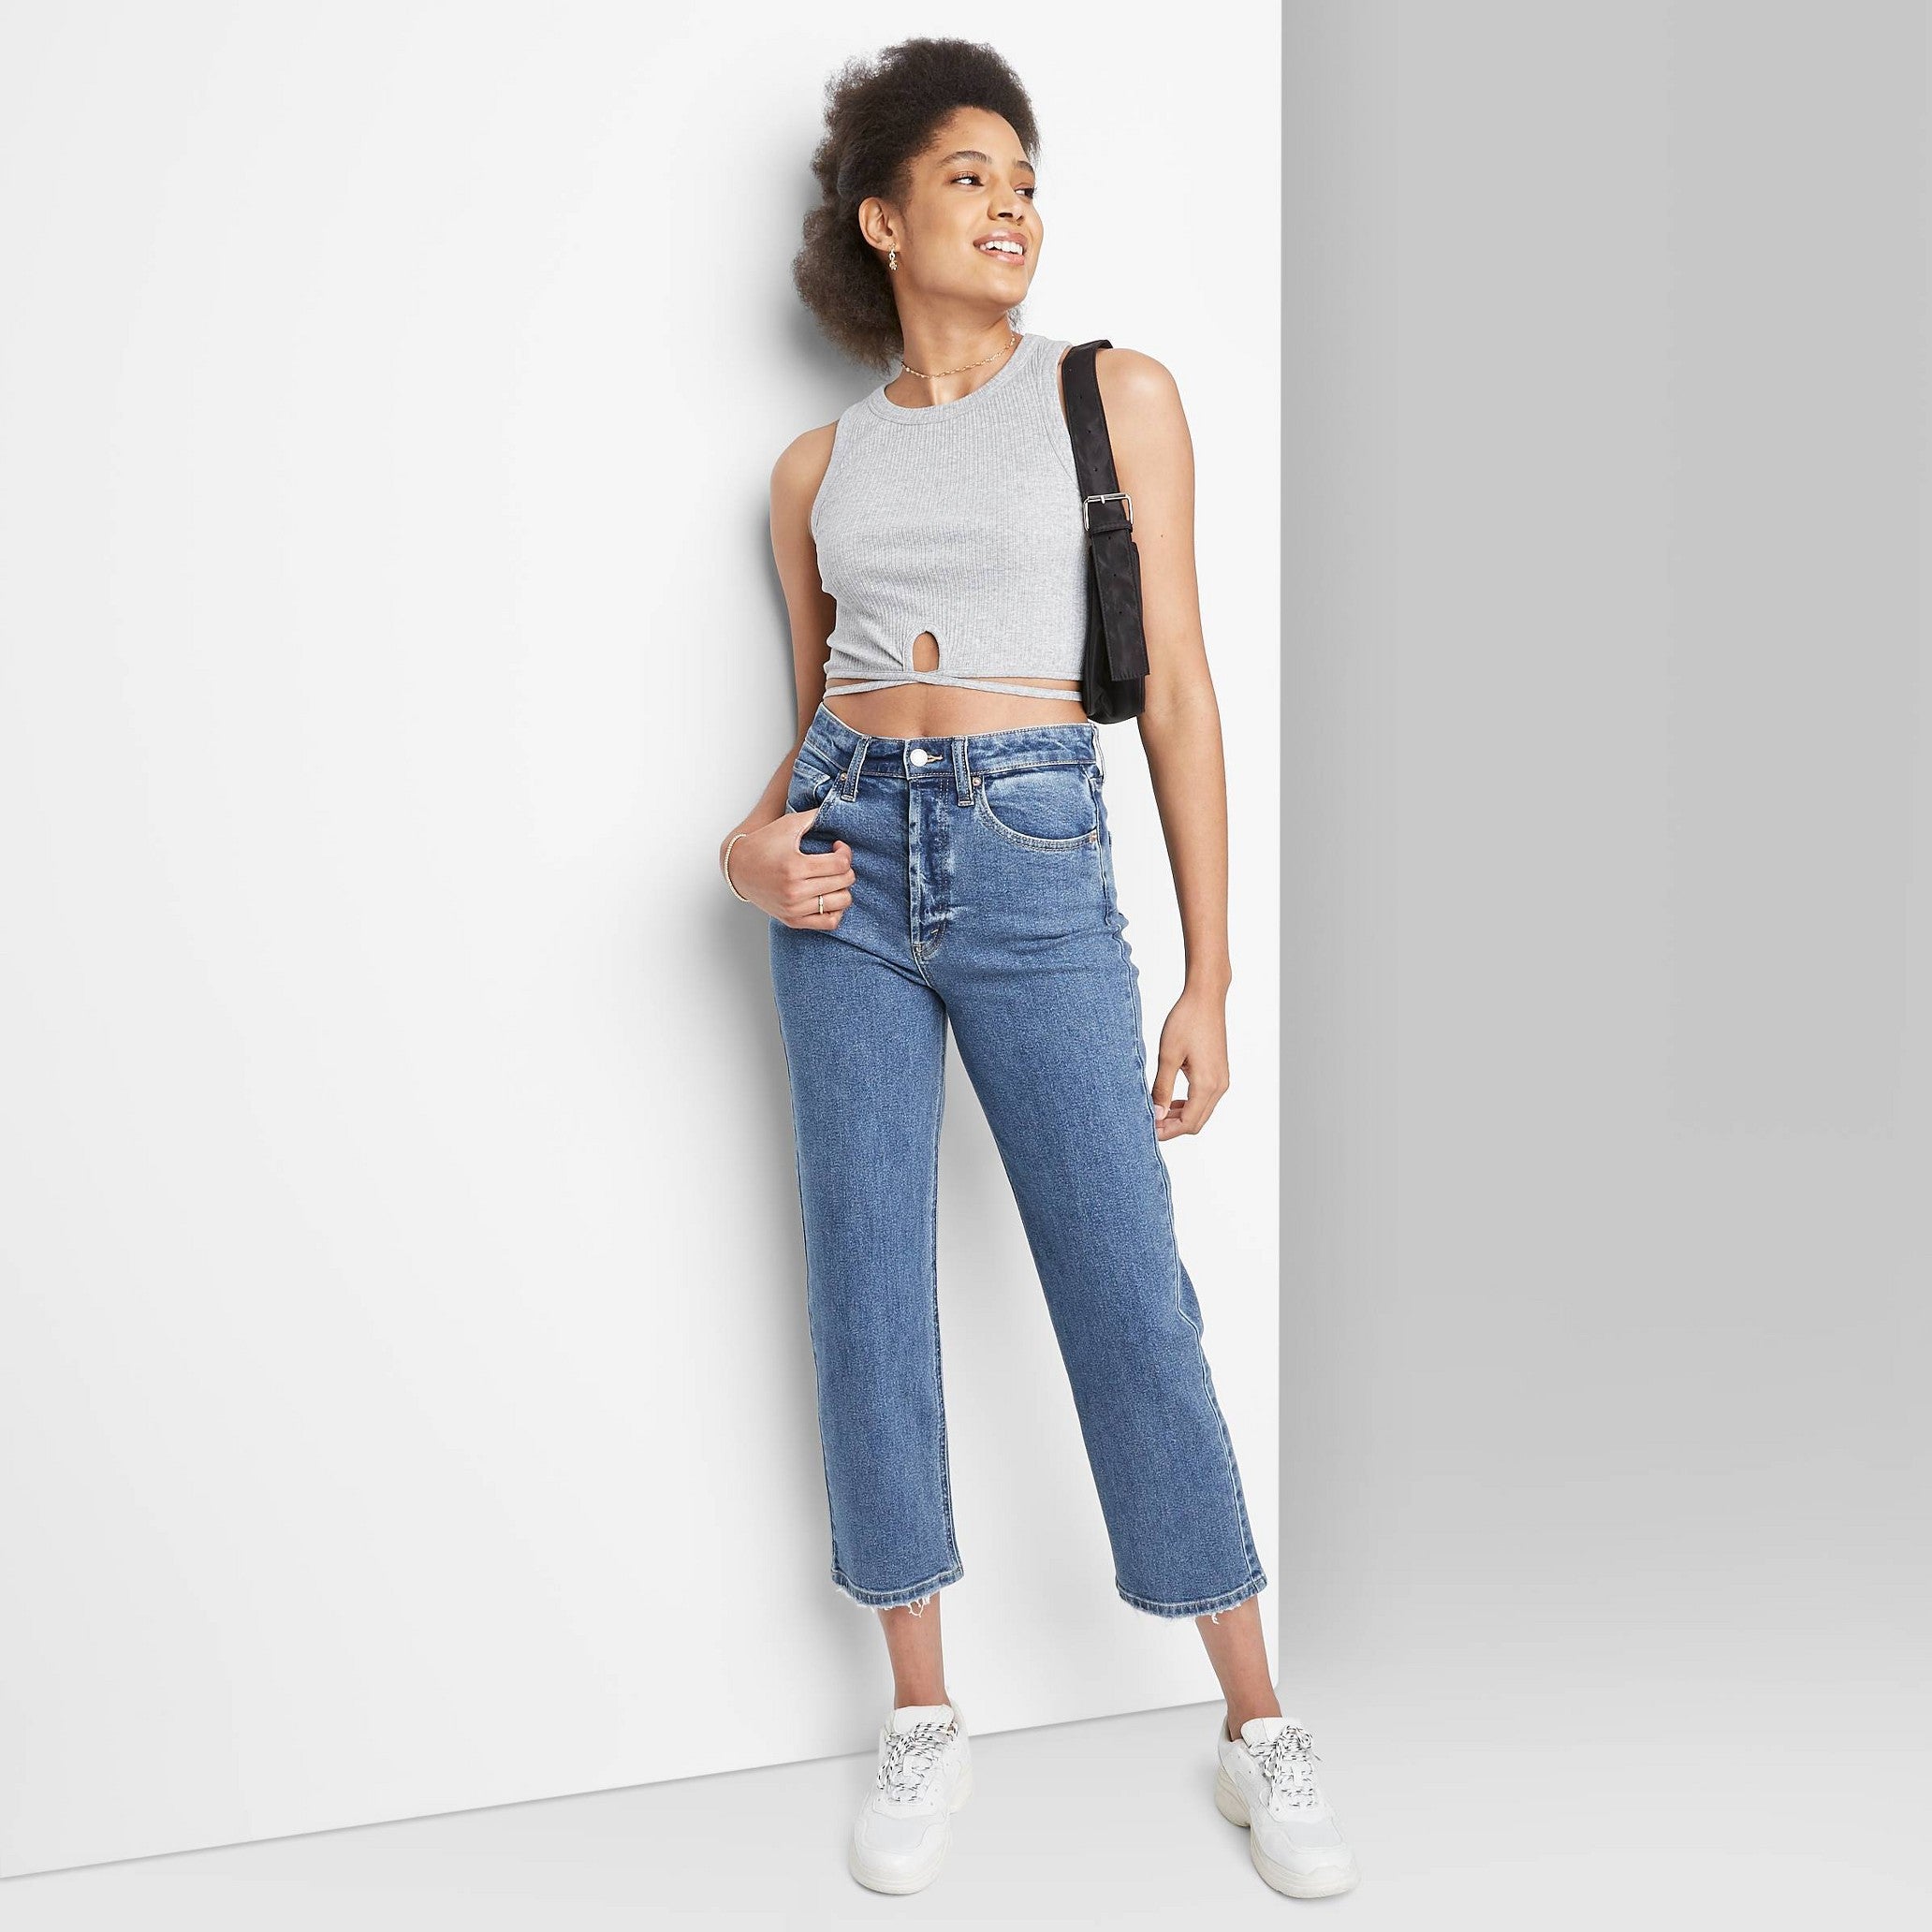 target wide leg jeans outfit｜TikTok Search